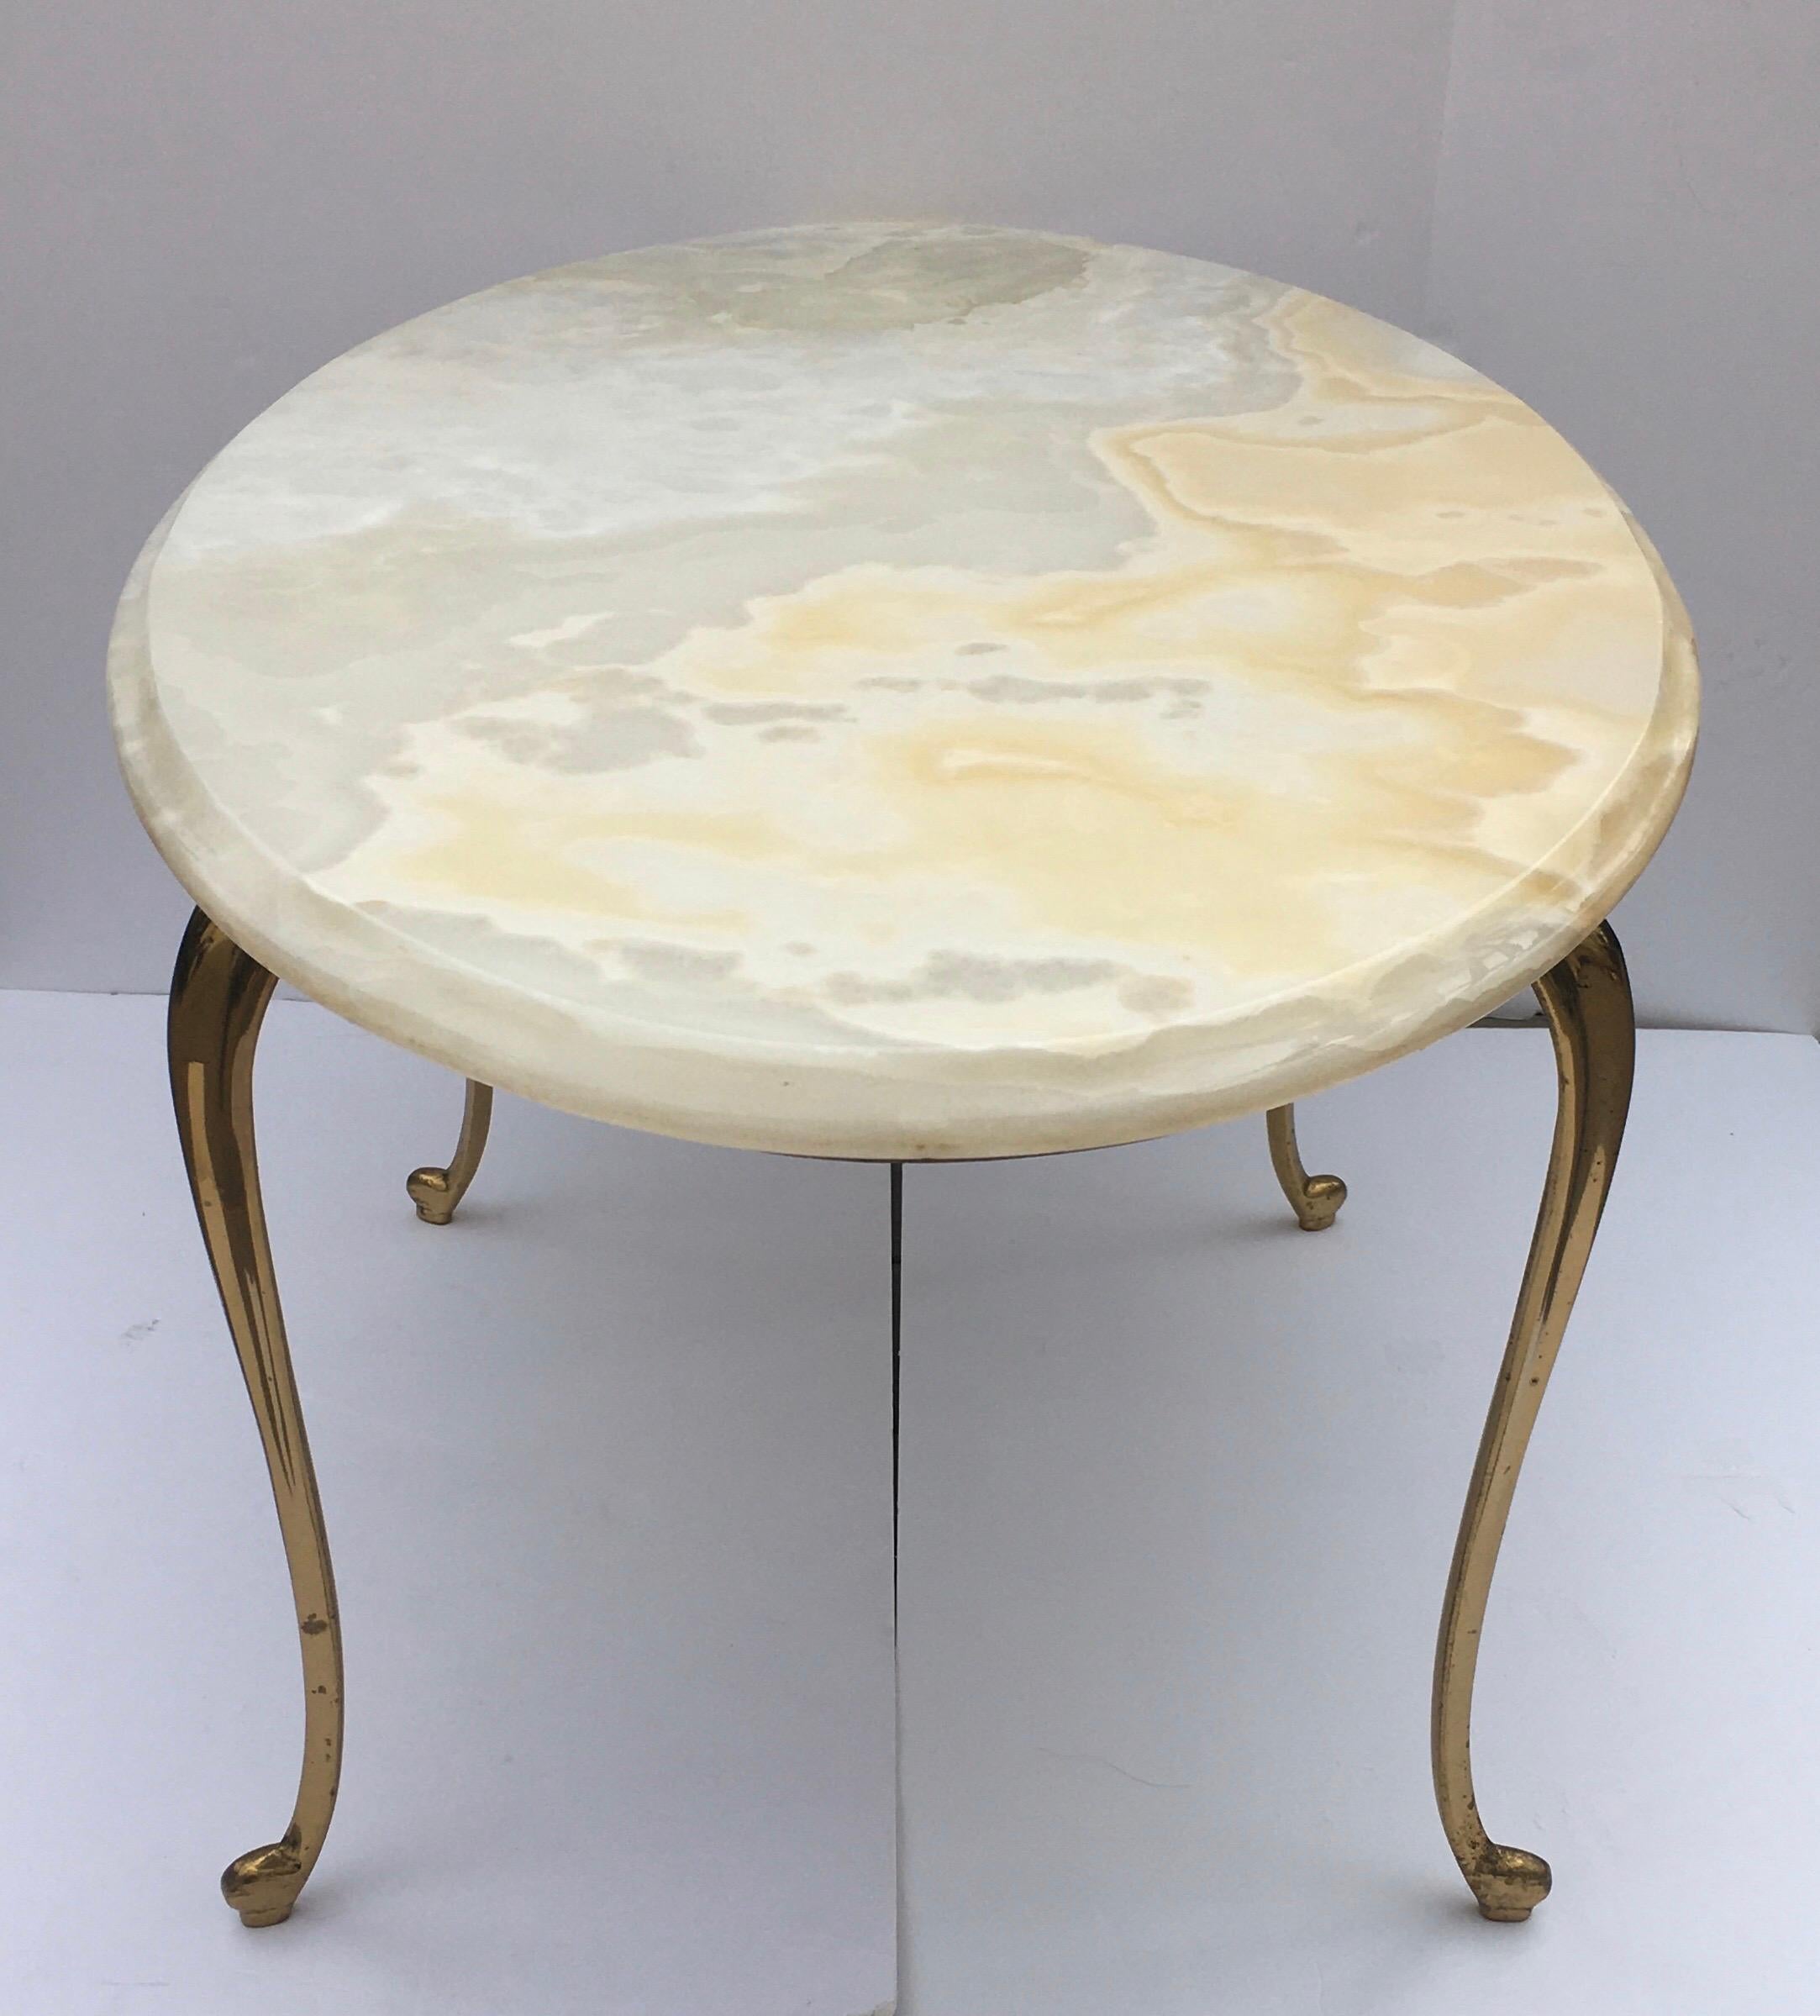 Italian midcentury Hollywood Regency oval shaped cocktail coffee table featuring a beveled onyx stone top and curved cabriole polished brass legs.